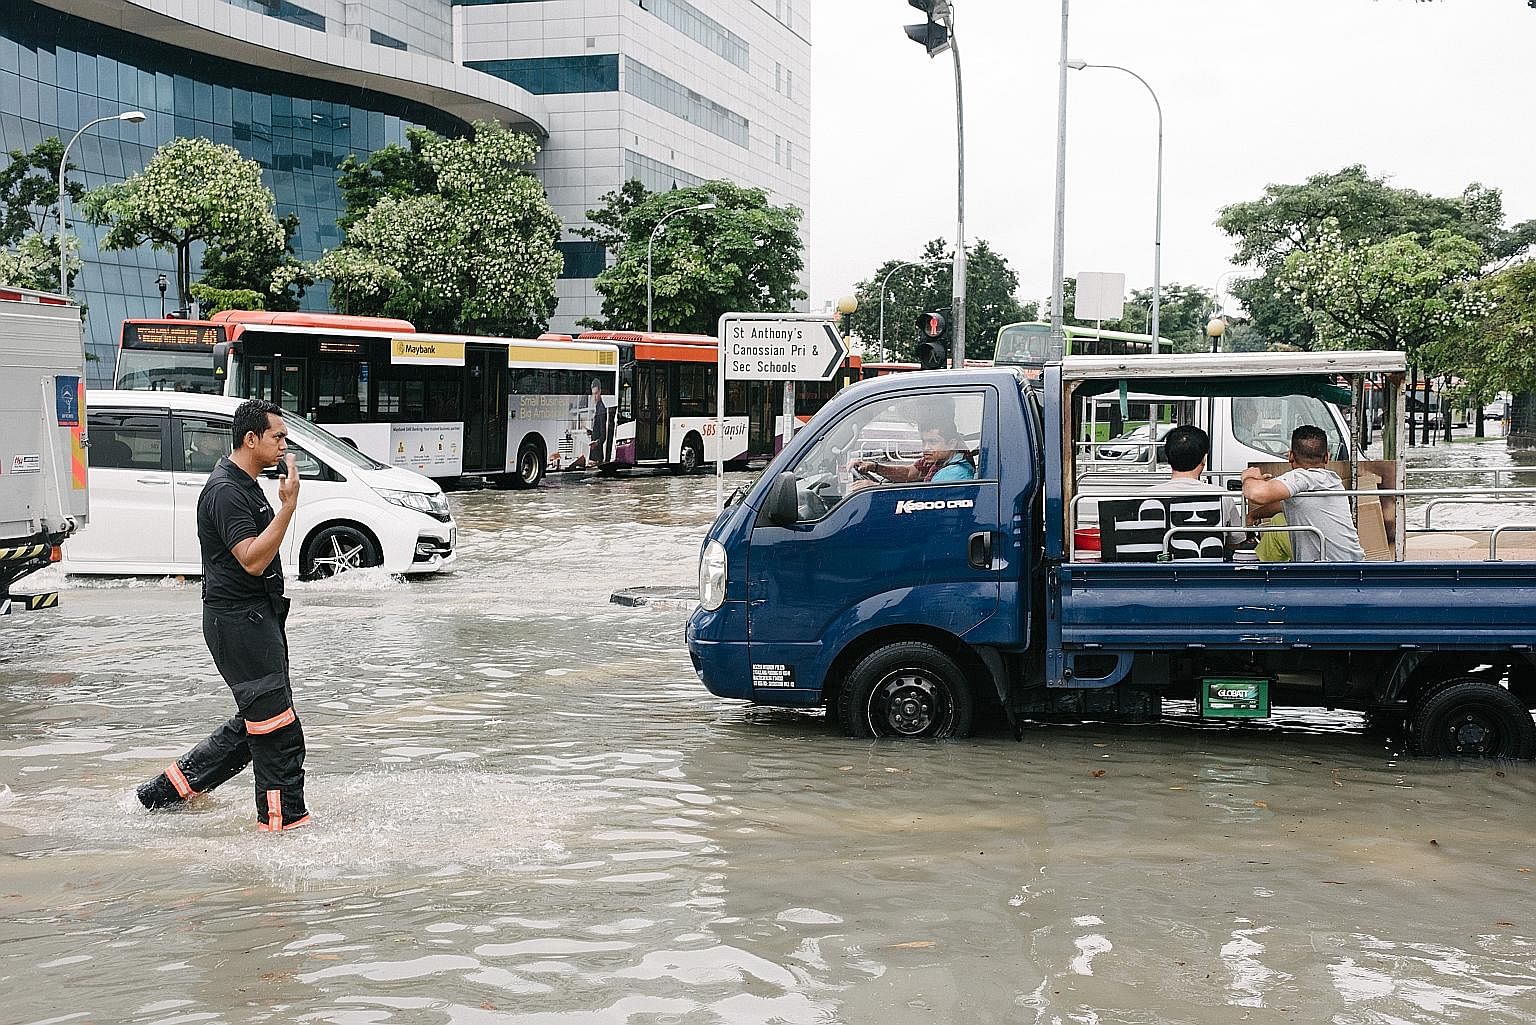 Above: Old flooding problems have largely been resolved, says PM Lee Hsien Loong, with an improved drainage system, among other measures. But climate change presents new challenges. Left: In education, full-day preschool capacity has been doubled to 